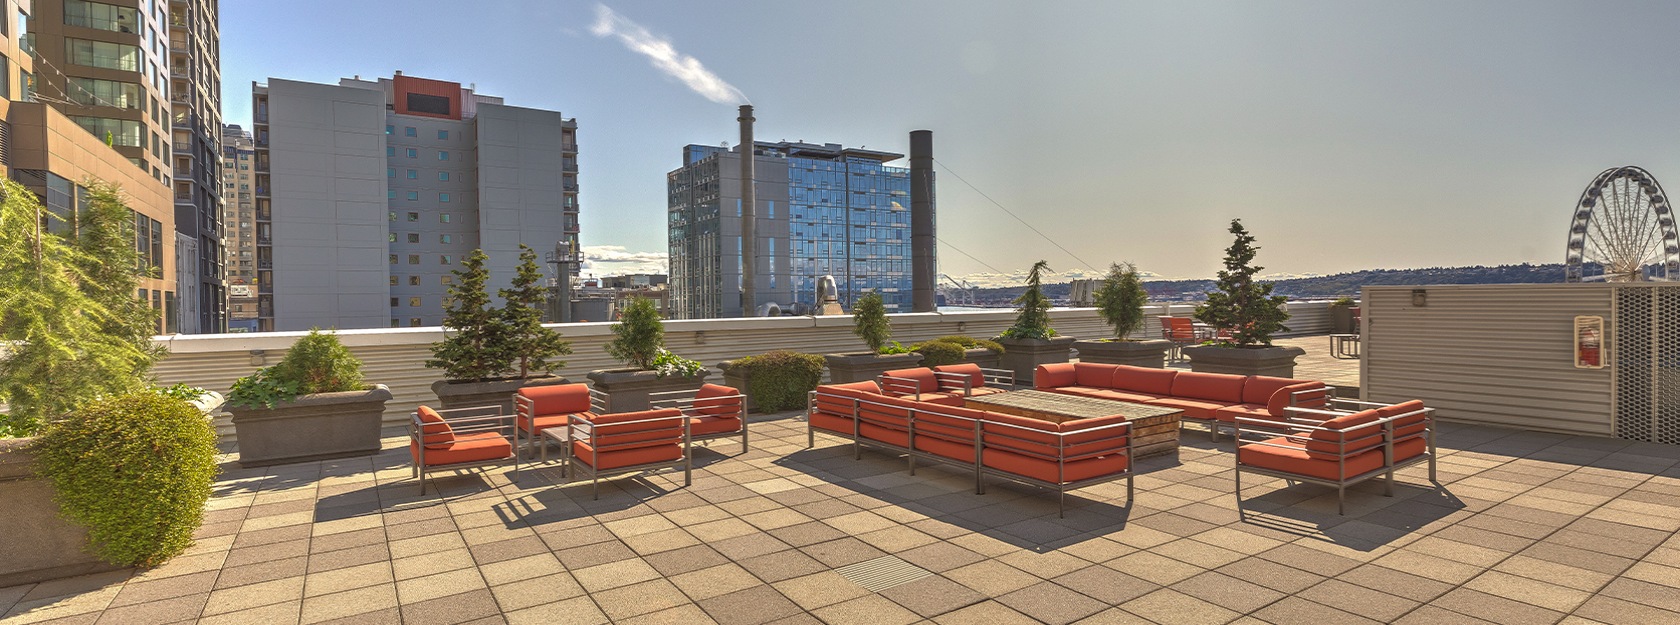 Rooftop patio with a view of downtown